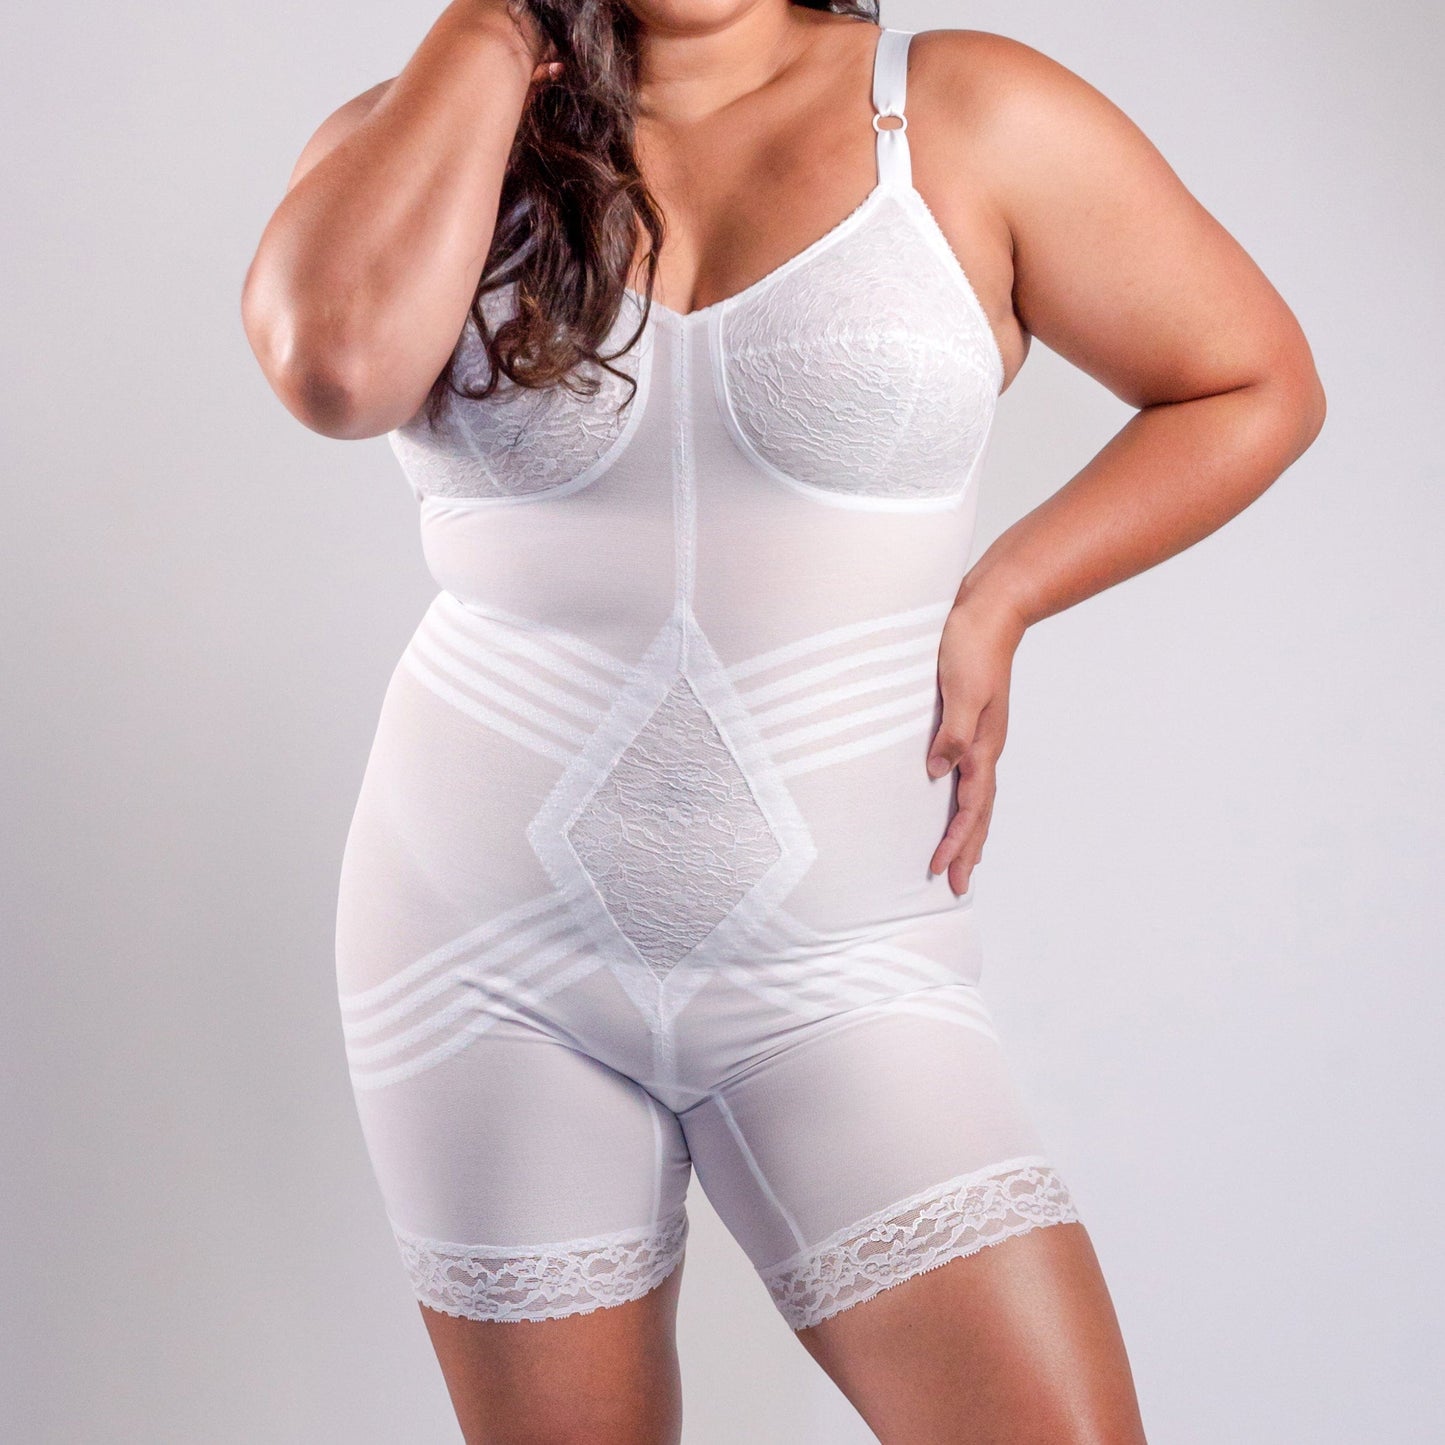 Style 9071 | Body Briefer Firm Shaping